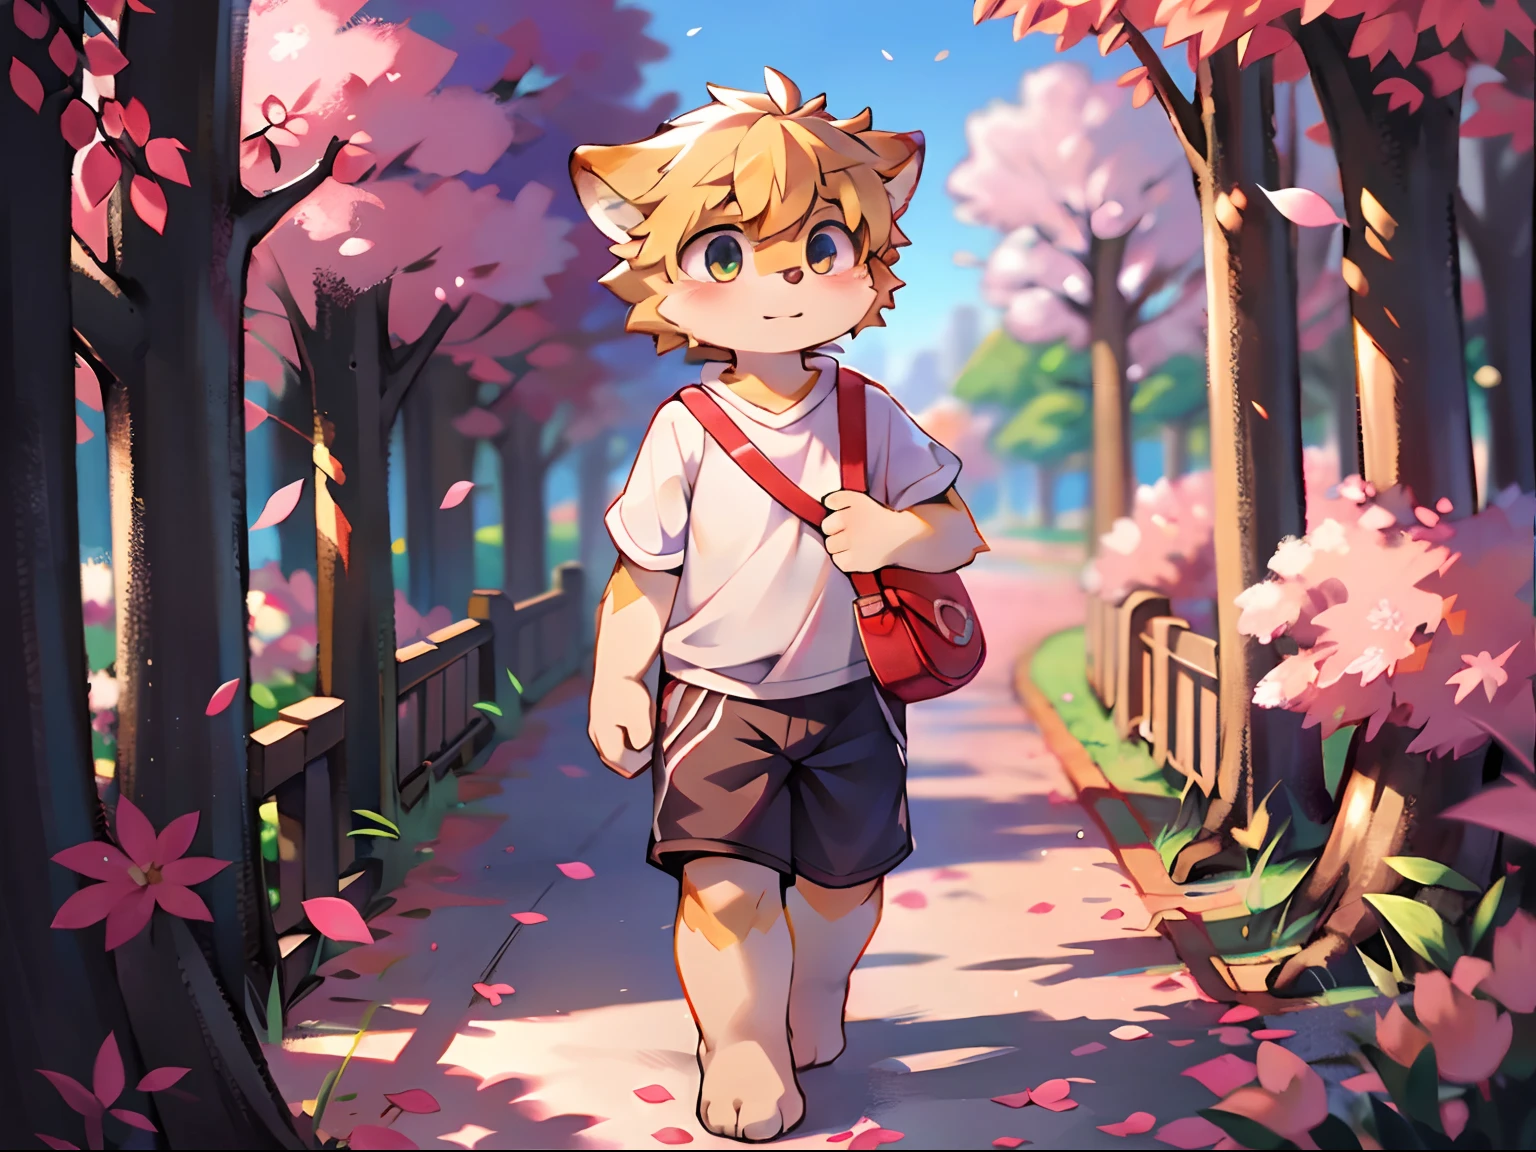 Top quality, Best quality, High-quality illustrations, Masterpiece, Super high resolution, Detailed background, Cherry blossom petals flutter,,  carrying a school bag, Libido boy，Shota，solo person， absurderes(Highly detailed beautiful face and eyes)Perfect anatomy, expression, (Good lighting, cinematic shadow)(komono, furry anthro) Dynamic Angle,Walk，Full body photo，Boy，Shota